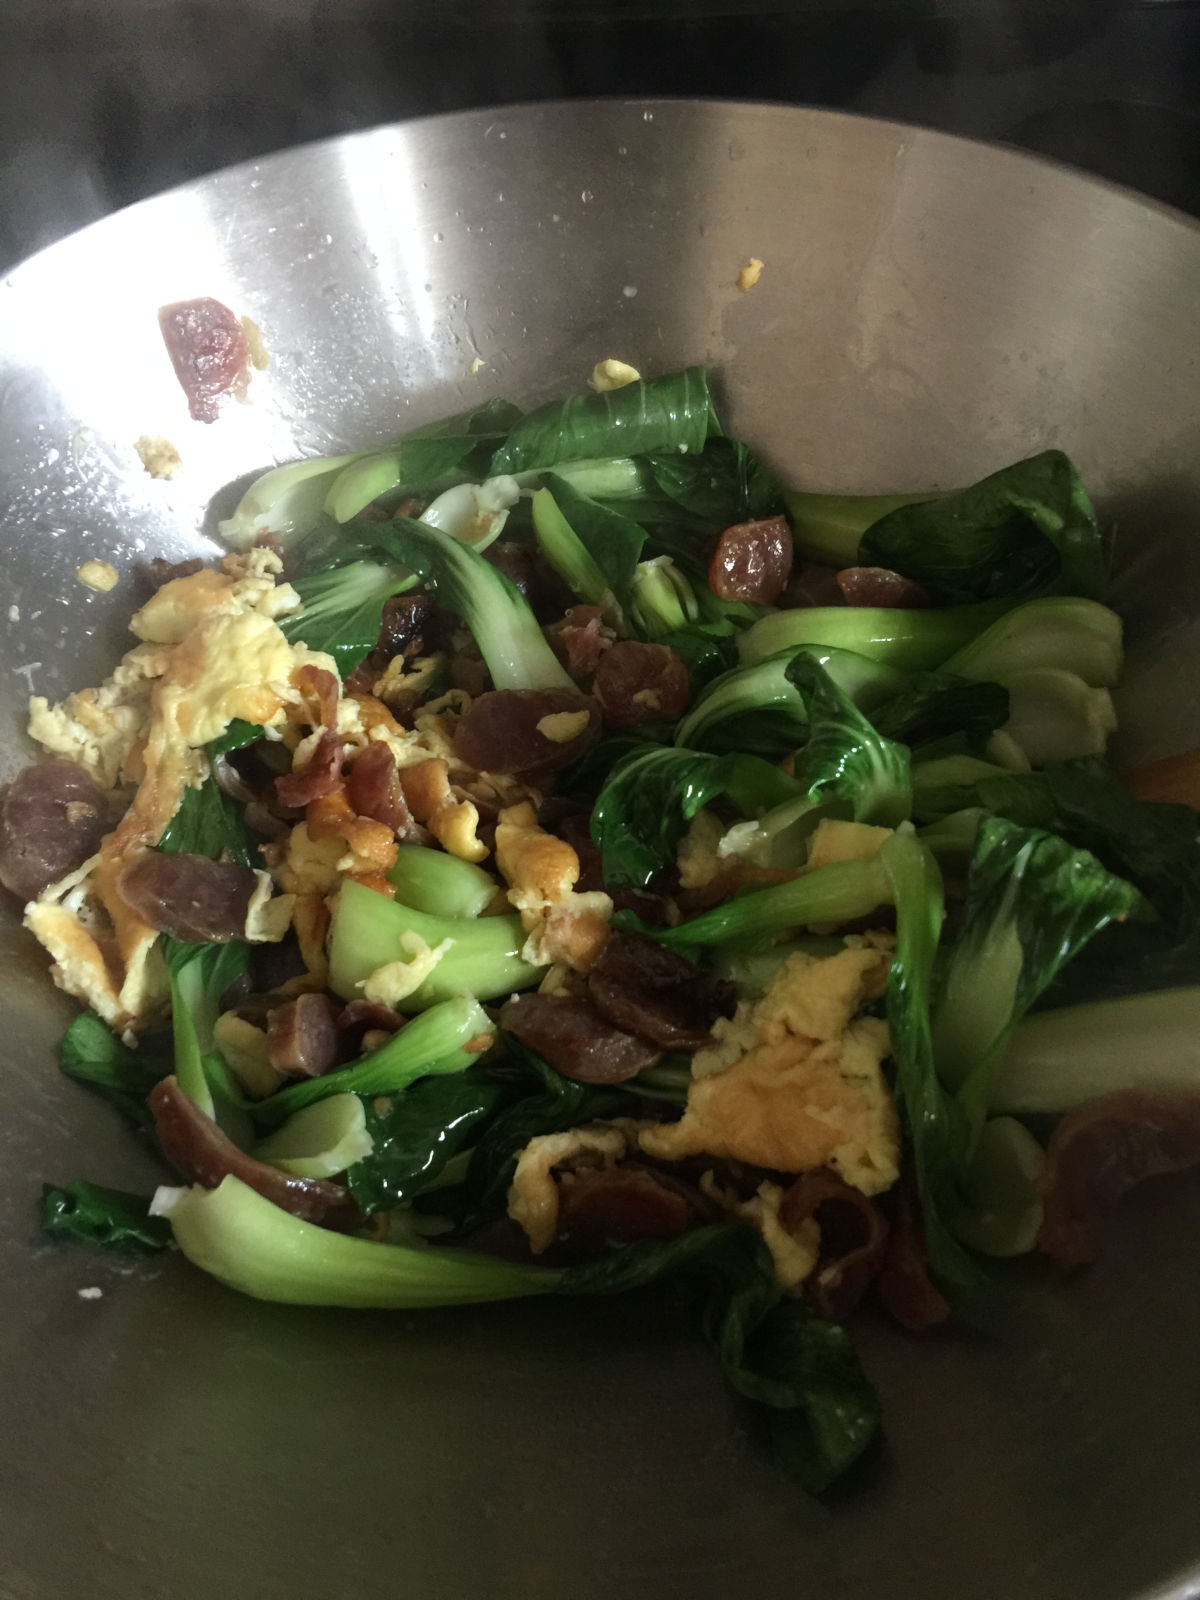 Bok choy cooked with eggs and sausages in wok.